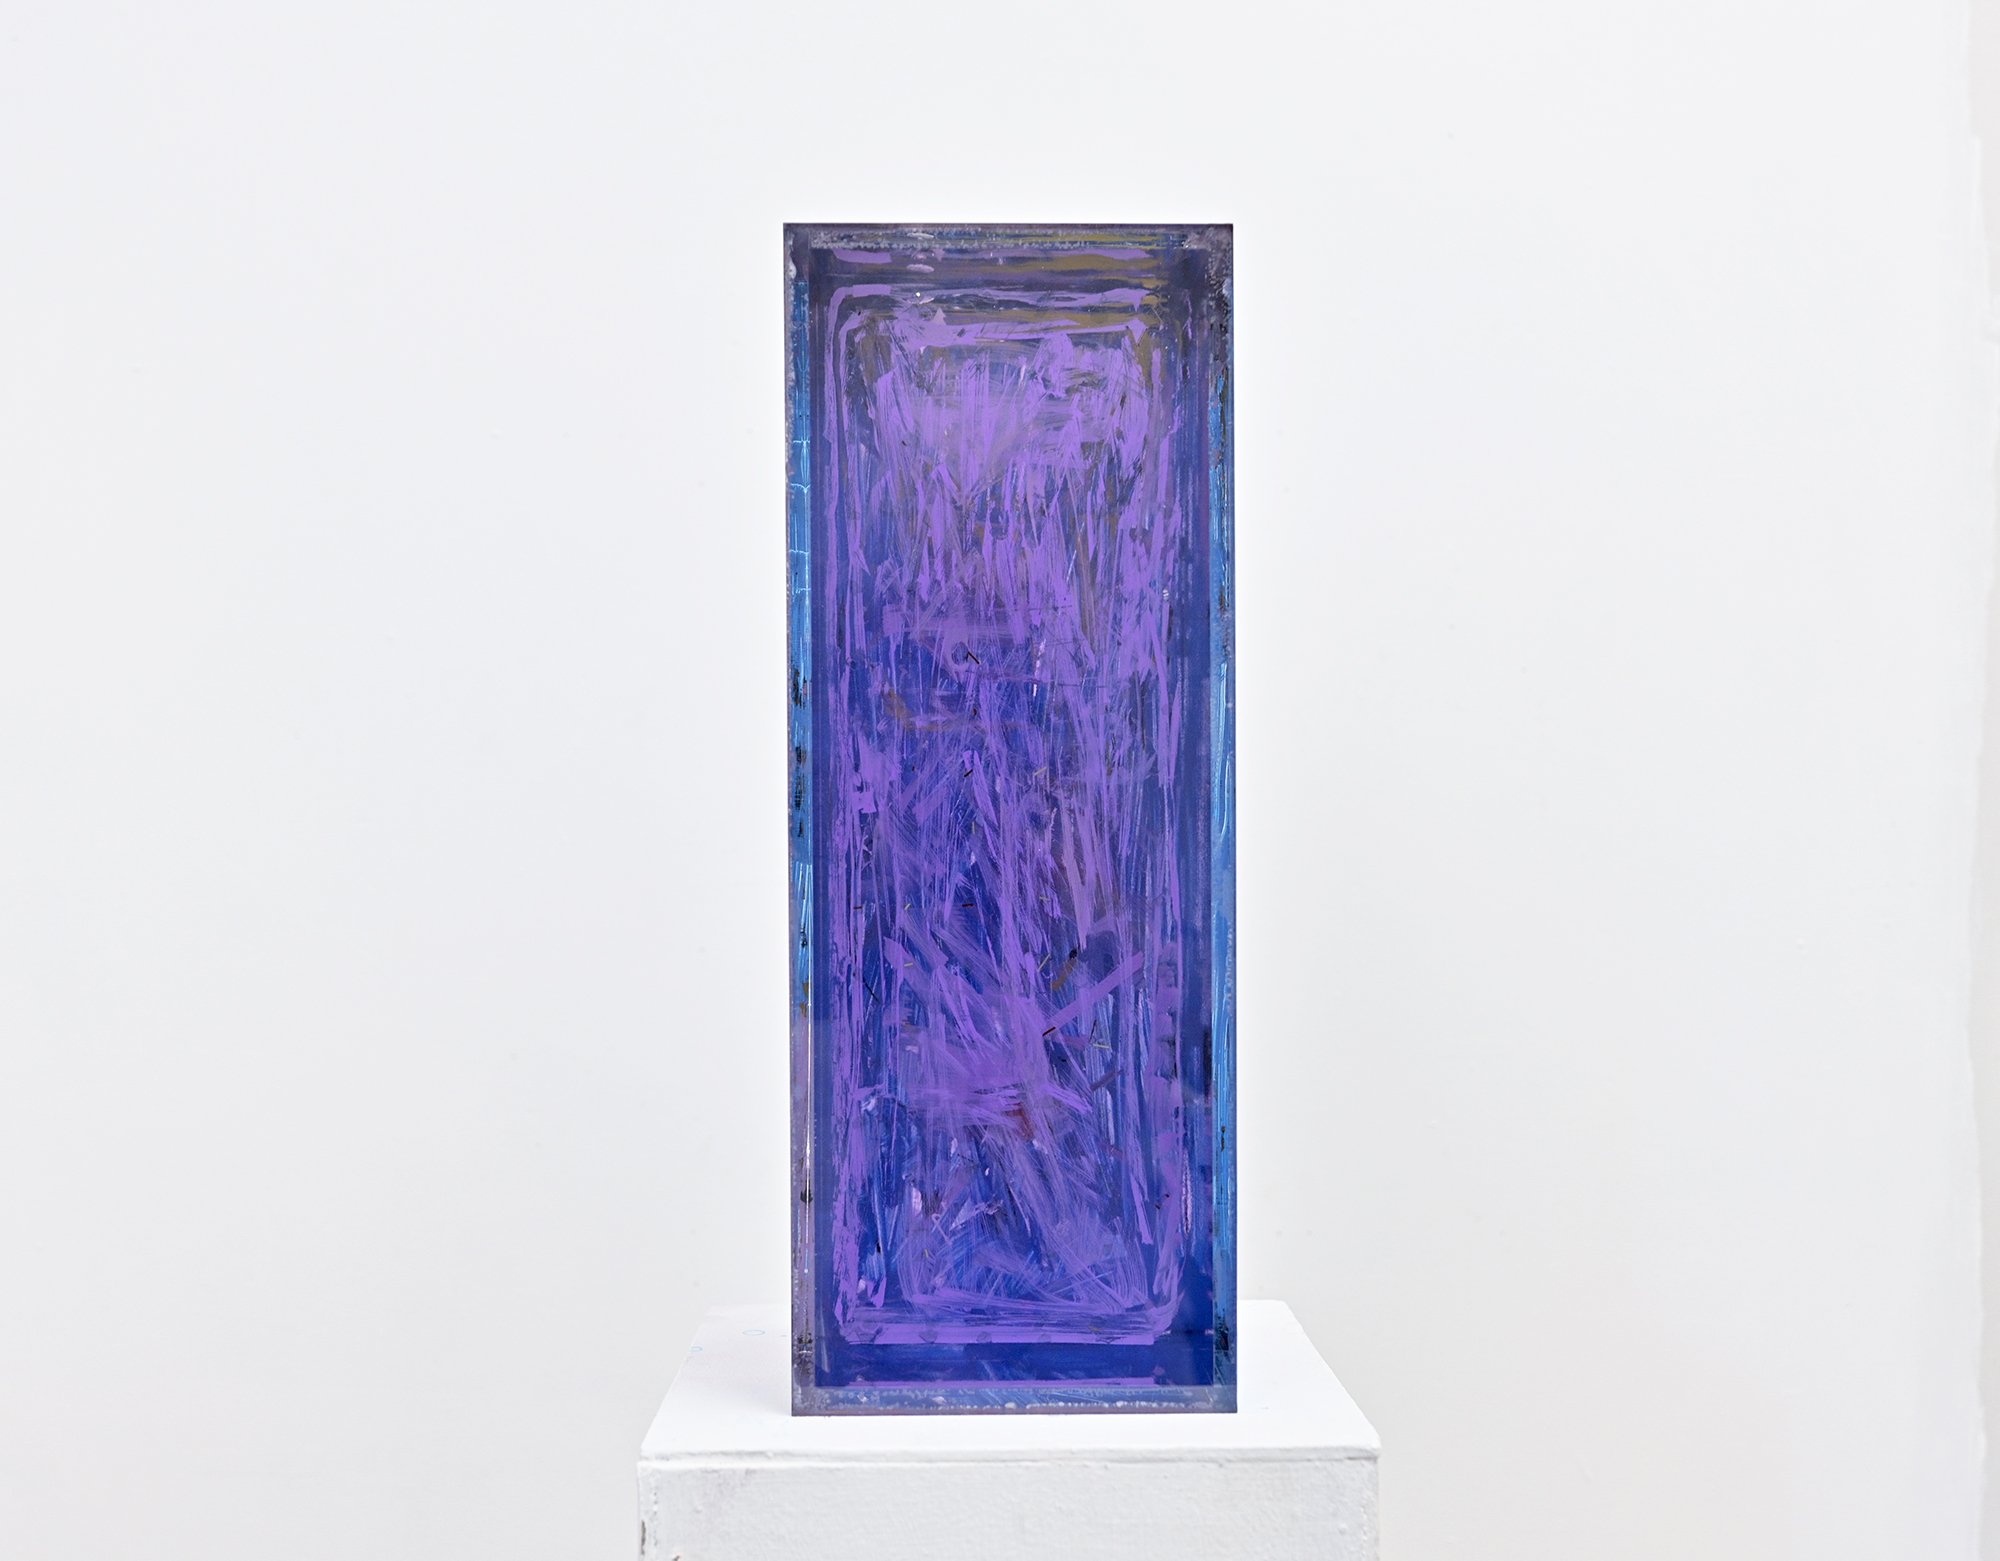   vision quest ( blue) , resin, paint, salvaged 1970s car glass in acrylic, 17 1/2” x 7” x 7” 